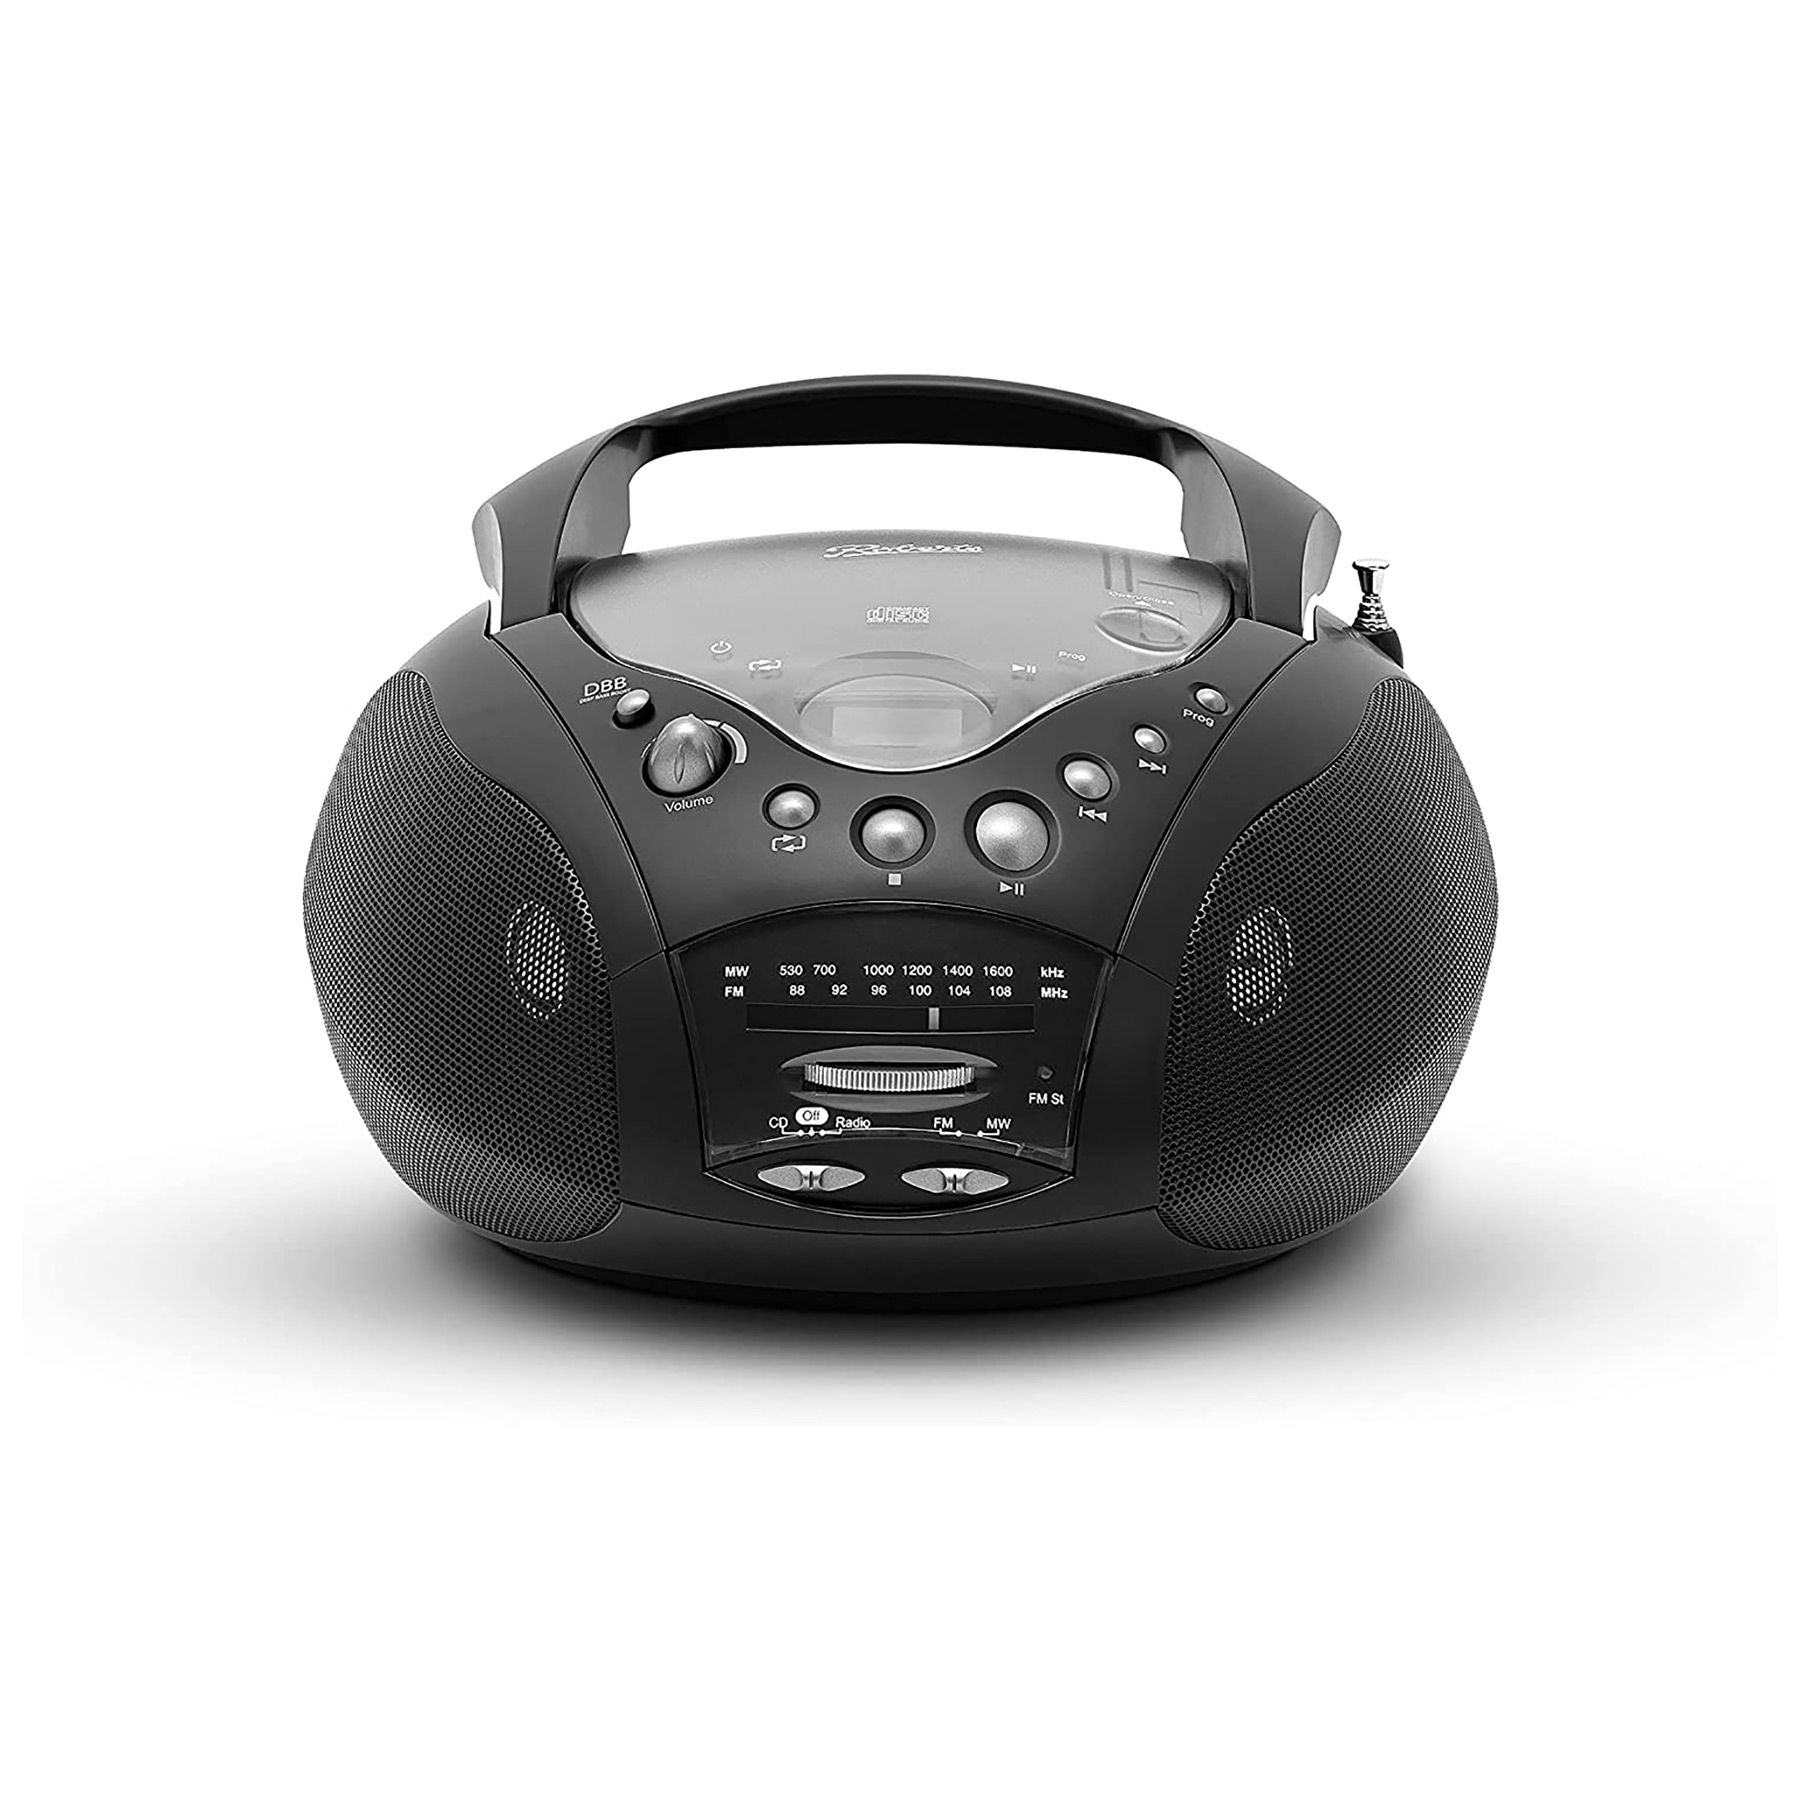 Roberts CD9959BK Portable CD Player with FM MW Radio in Black